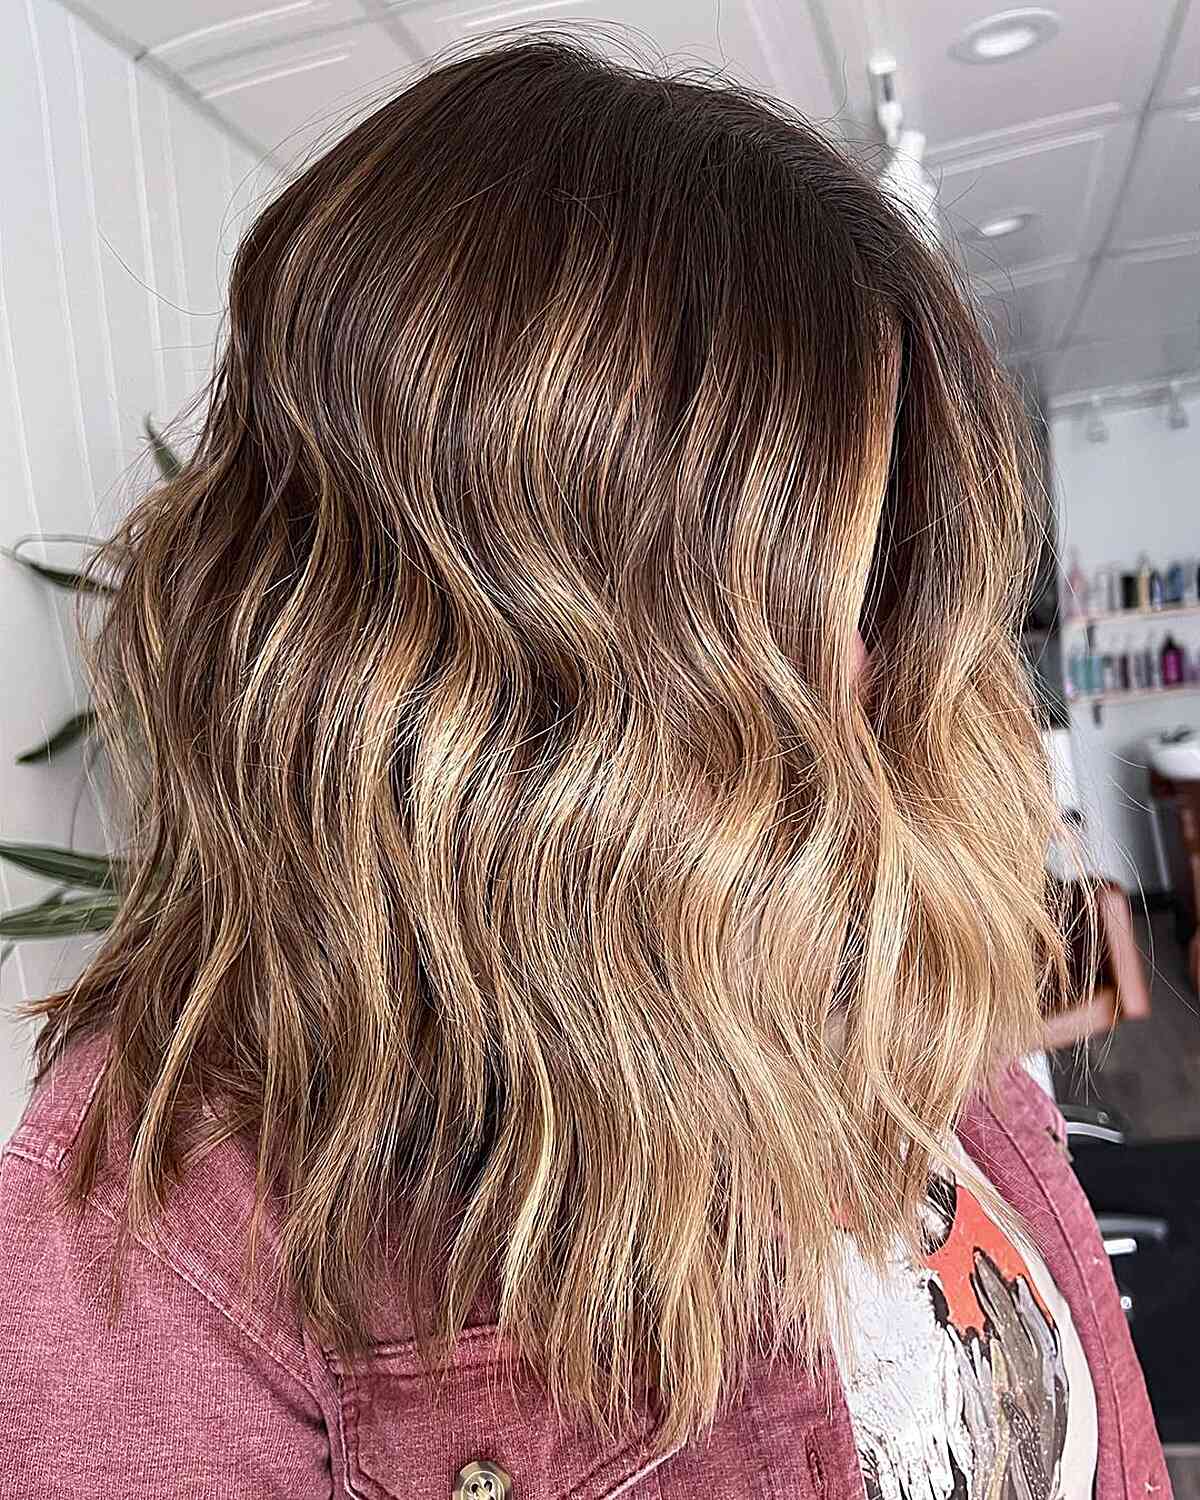 Shoulder-Grazing Choppy Haircut with Face-Framing Blonde Balayage Highlights